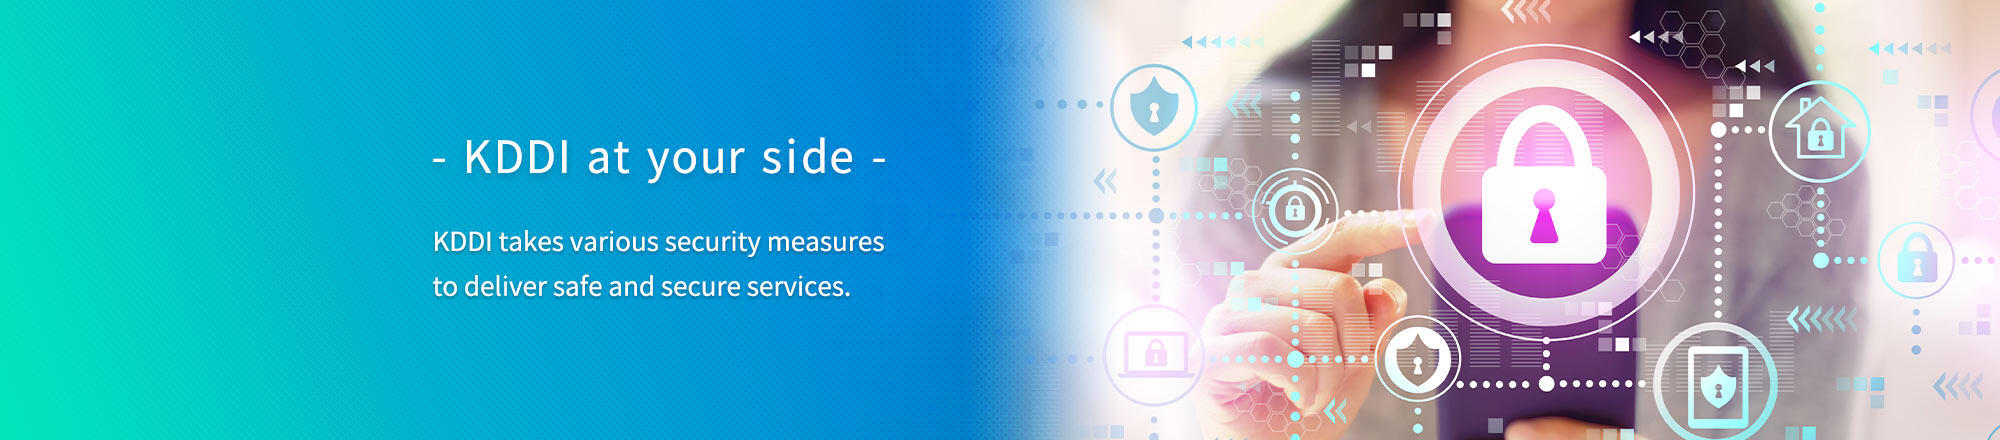 - KDDI at your side - KDDI takes various security measures to deliver safe and secure services.